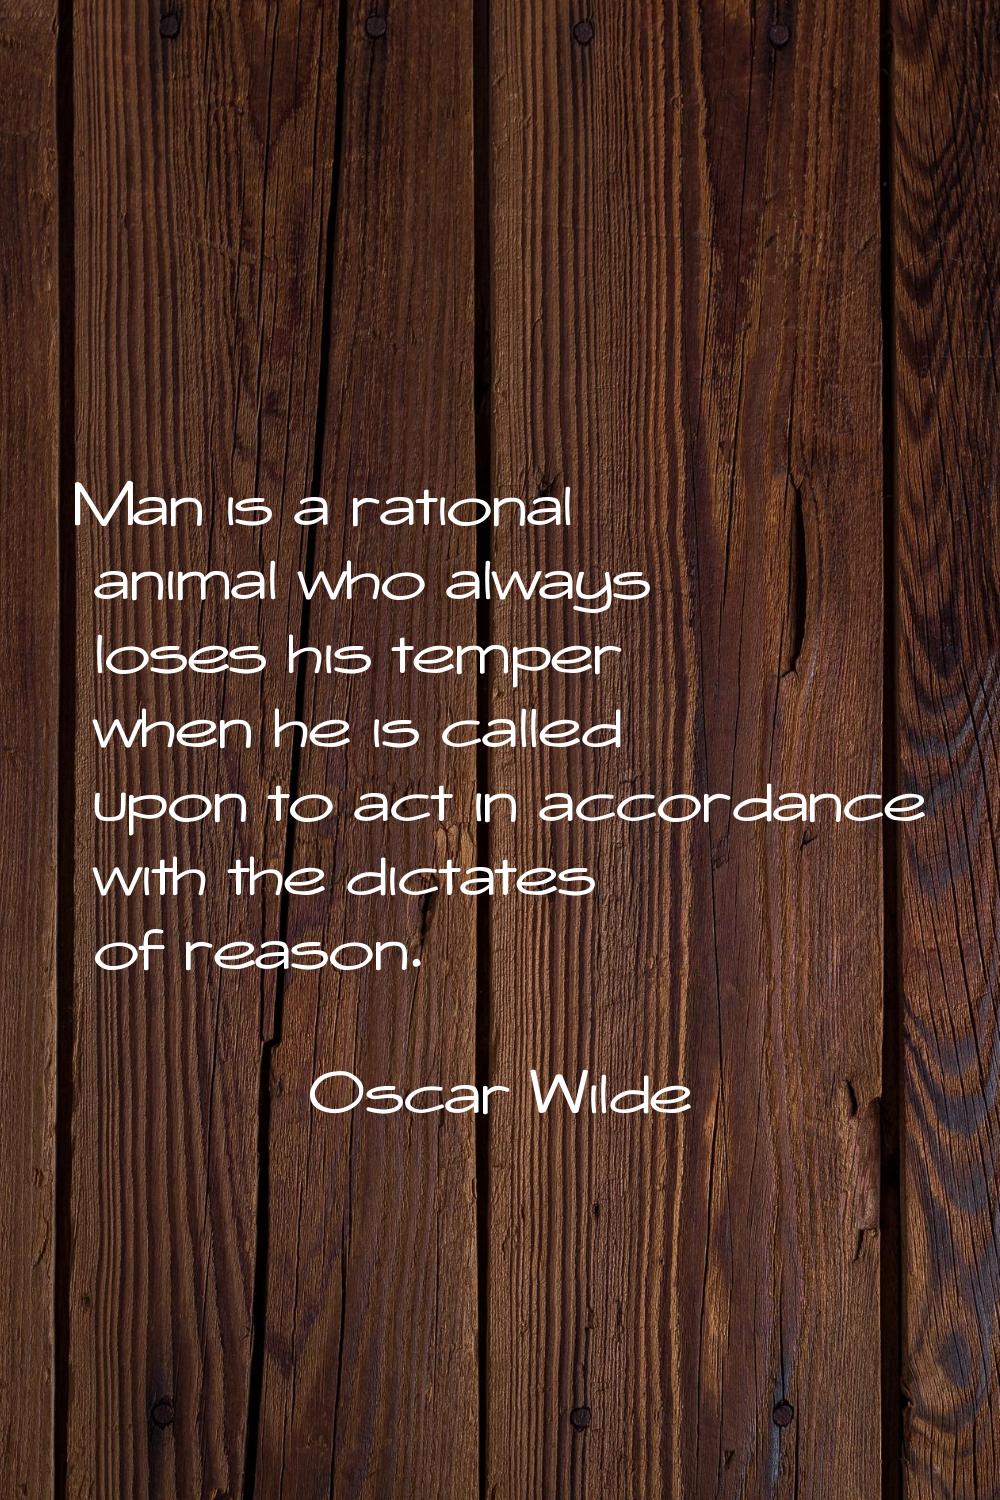 Man is a rational animal who always loses his temper when he is called upon to act in accordance wi